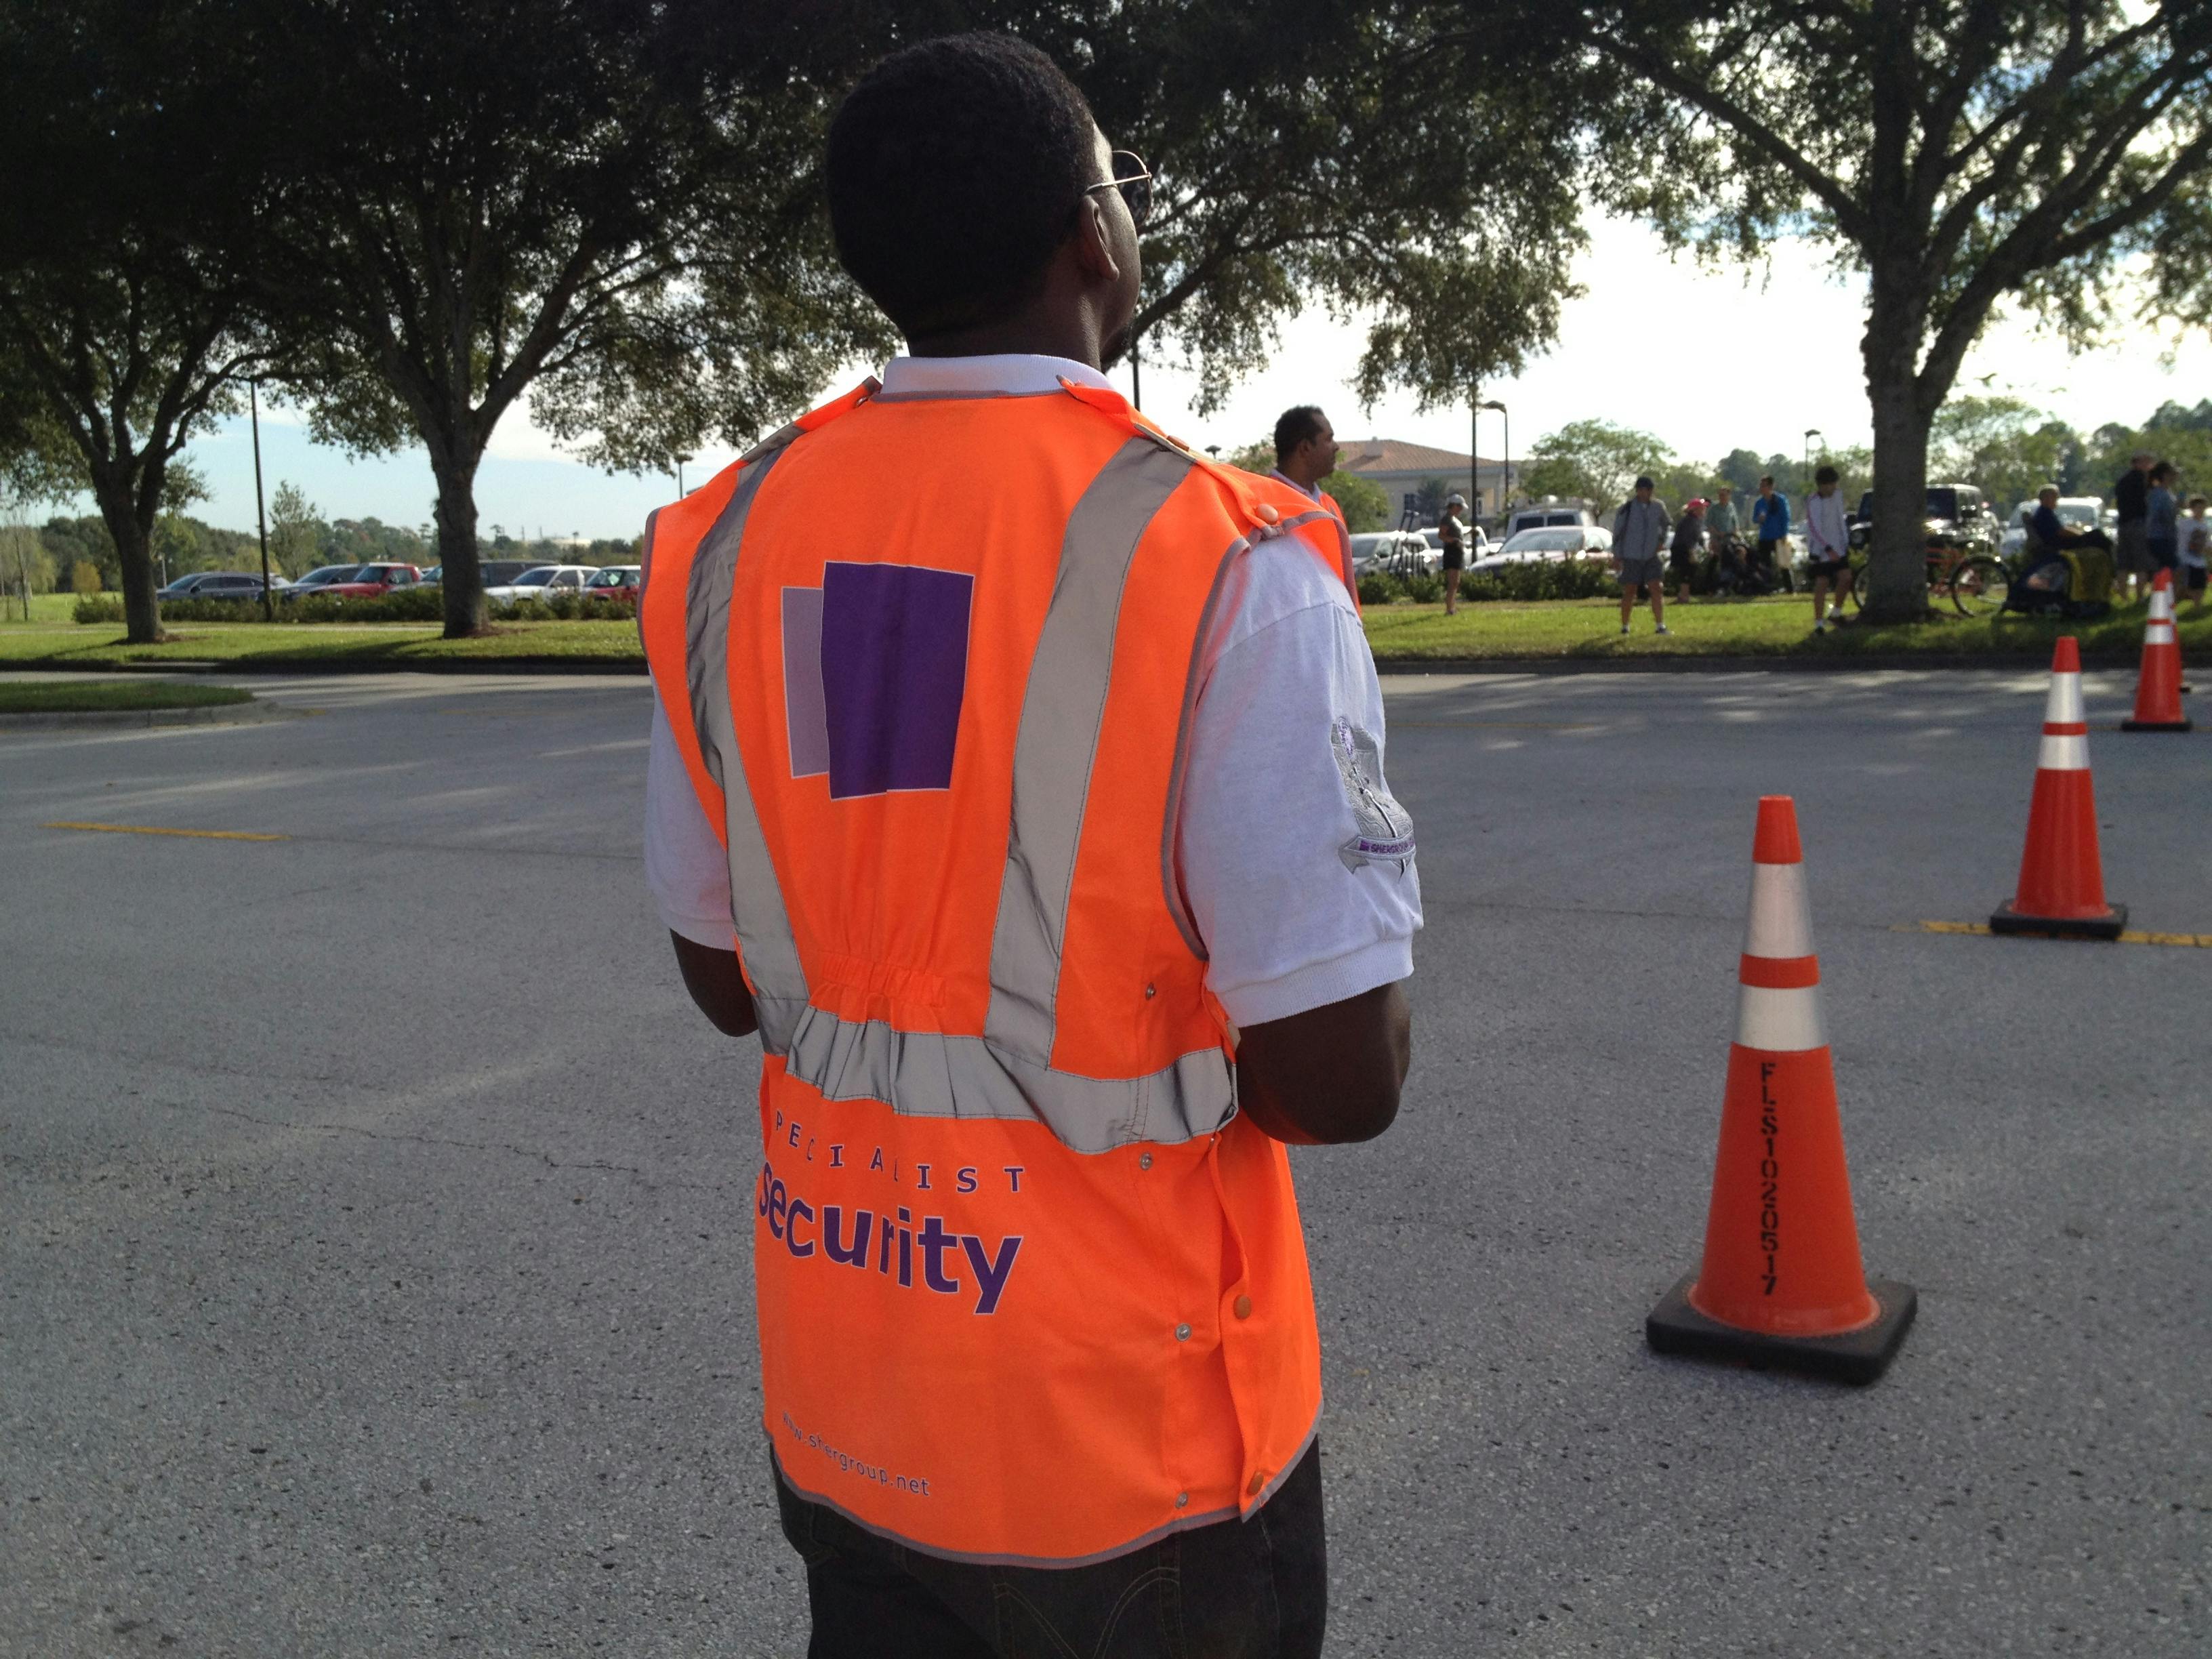 Free stock photo of Security Officer, Shergroup, traffic cones